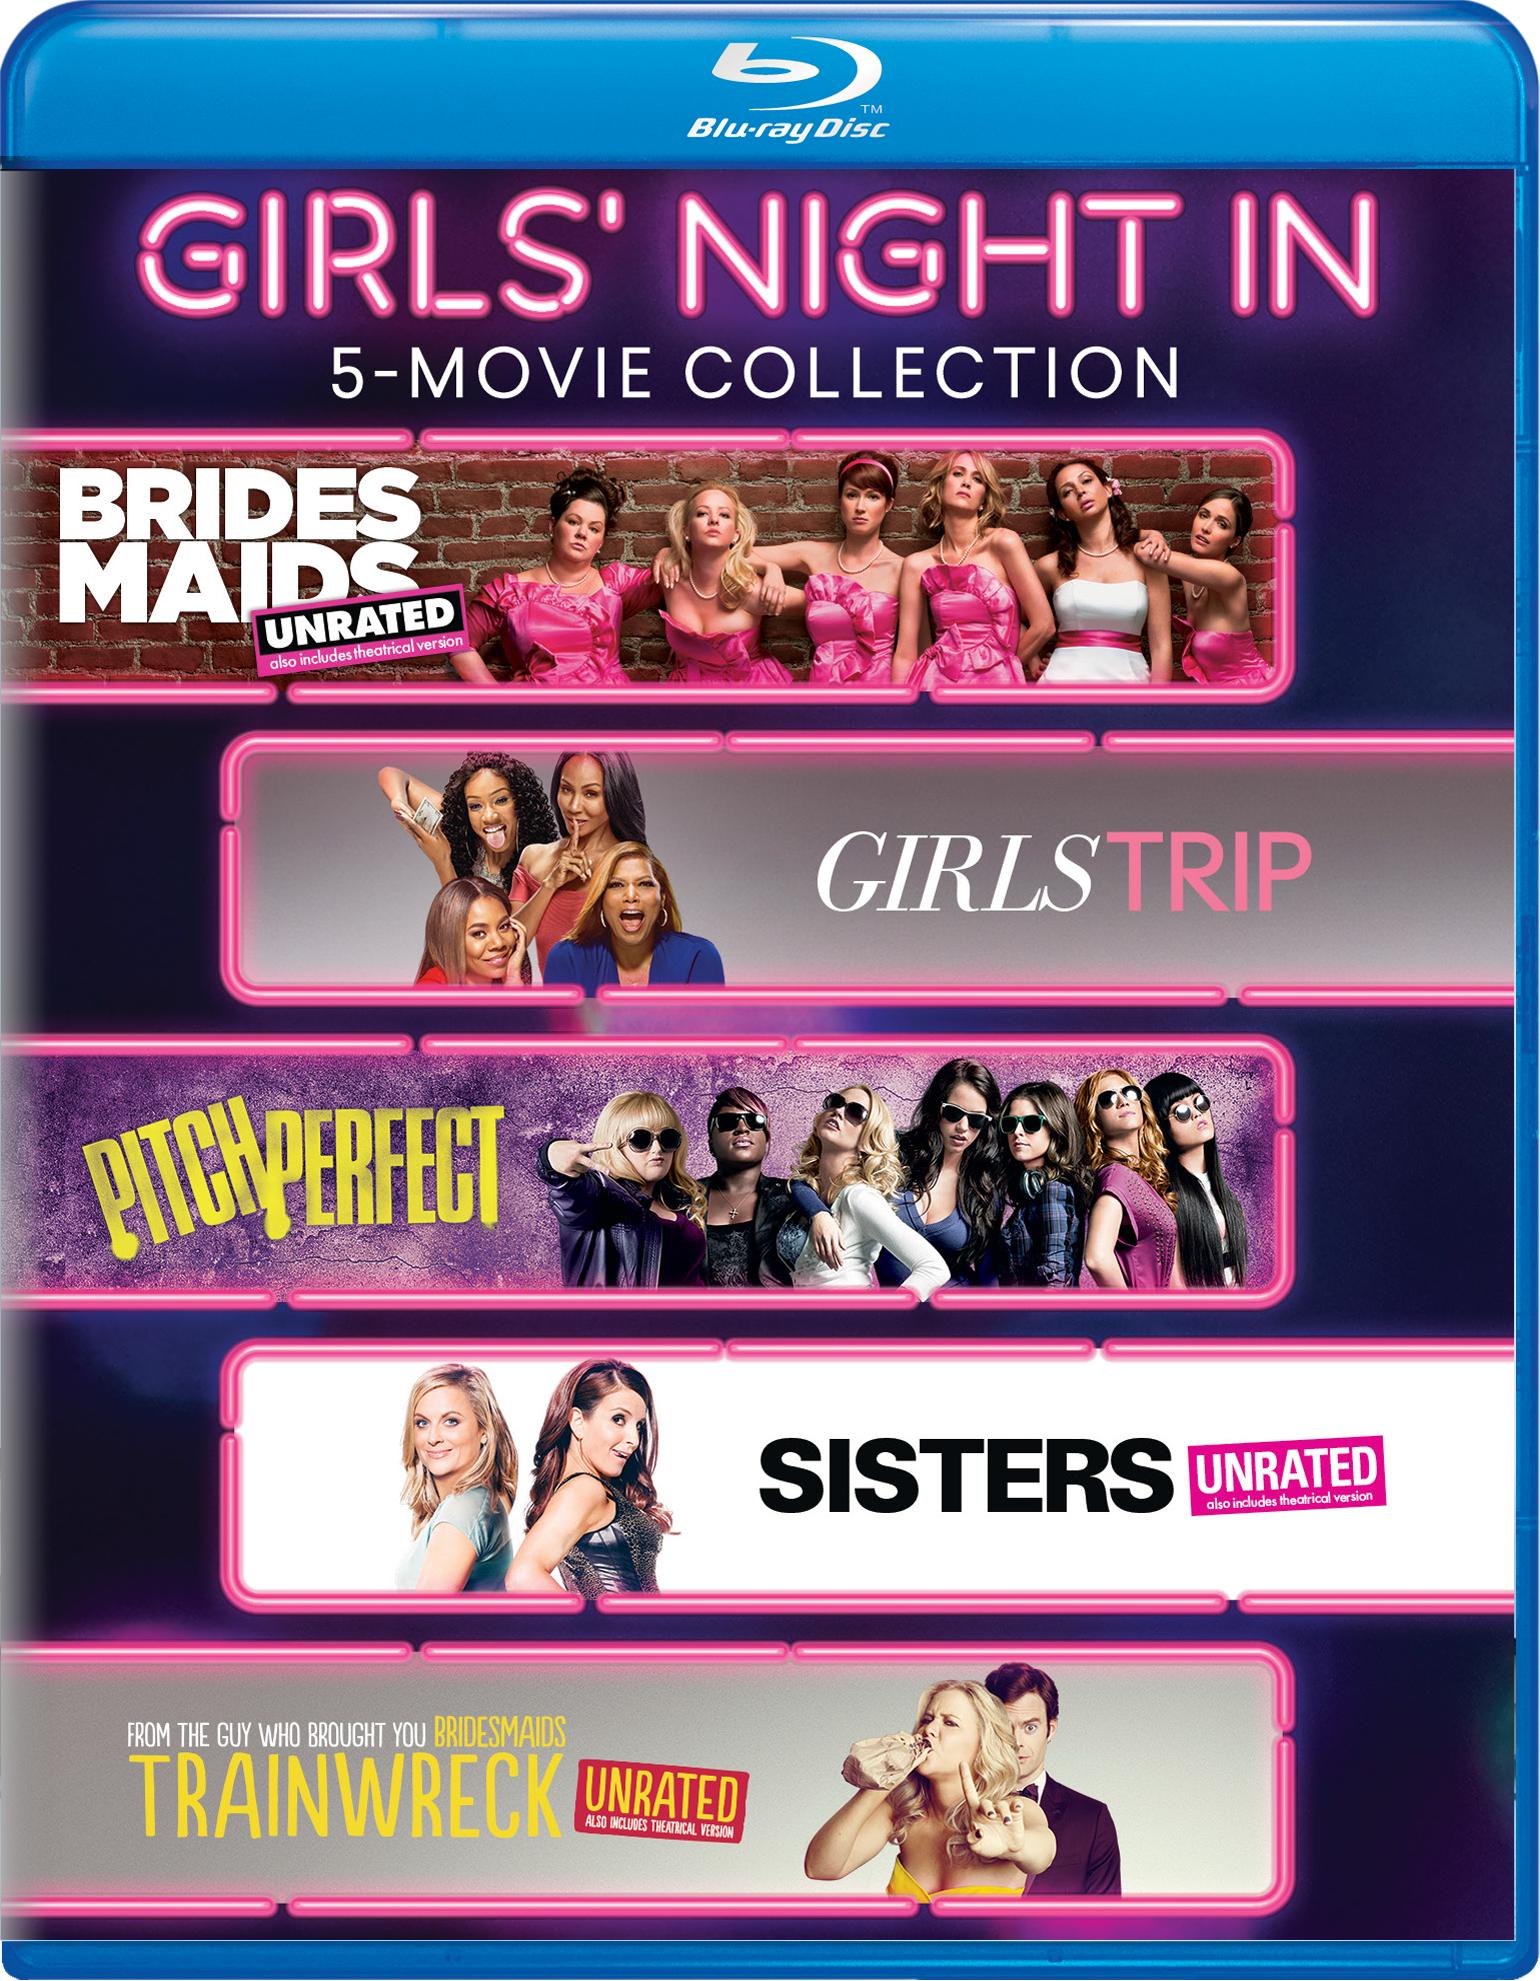 Girls Night In 5-Movie Collection (Blu-ray Set) - Blu-ray   - Comedy Movies On Blu-ray - Movies On GRUV